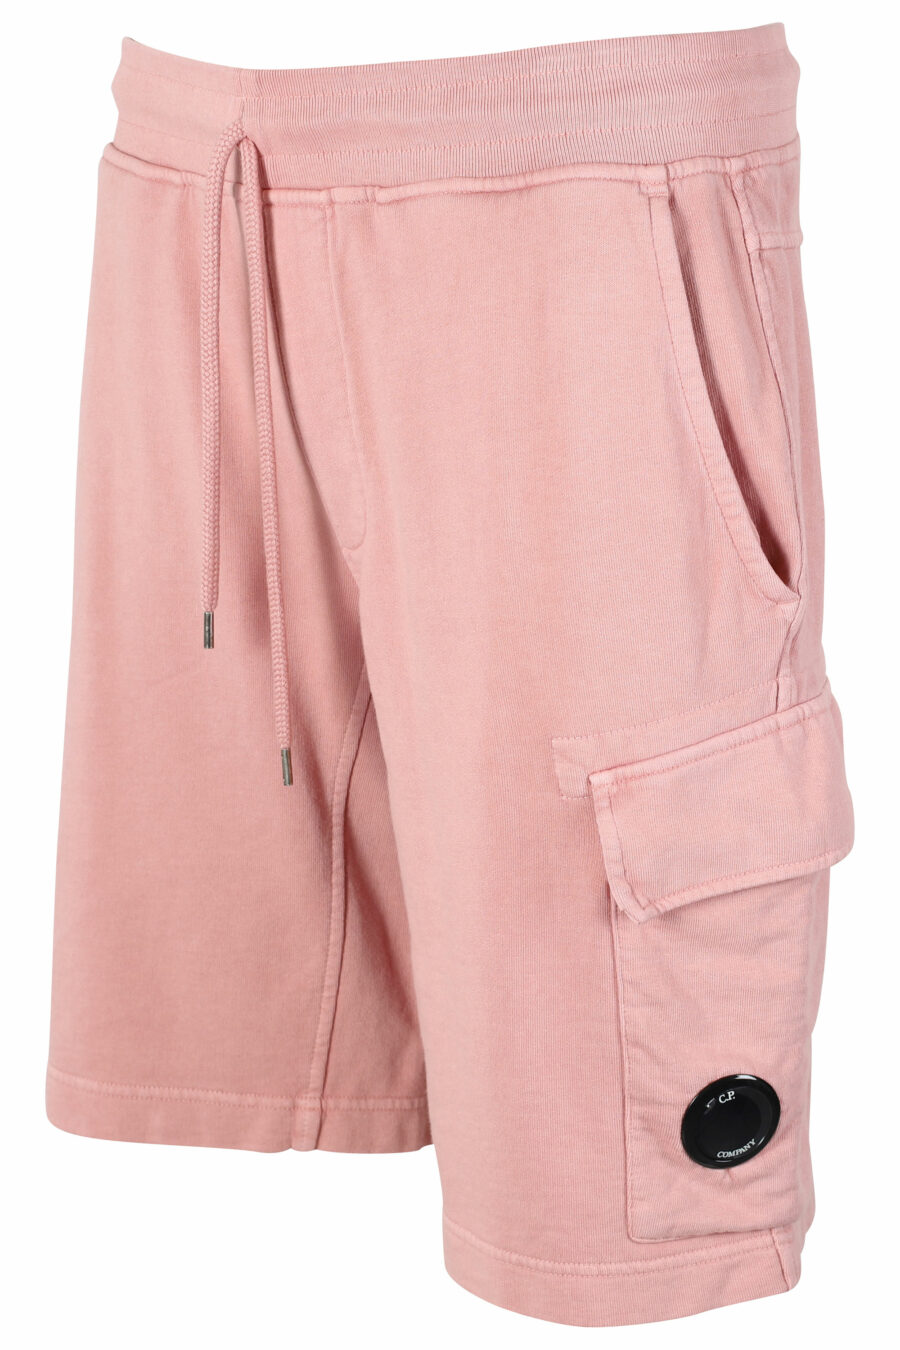 Tracksuit bottoms pink cargo style with circular mini logo - IMG 9518